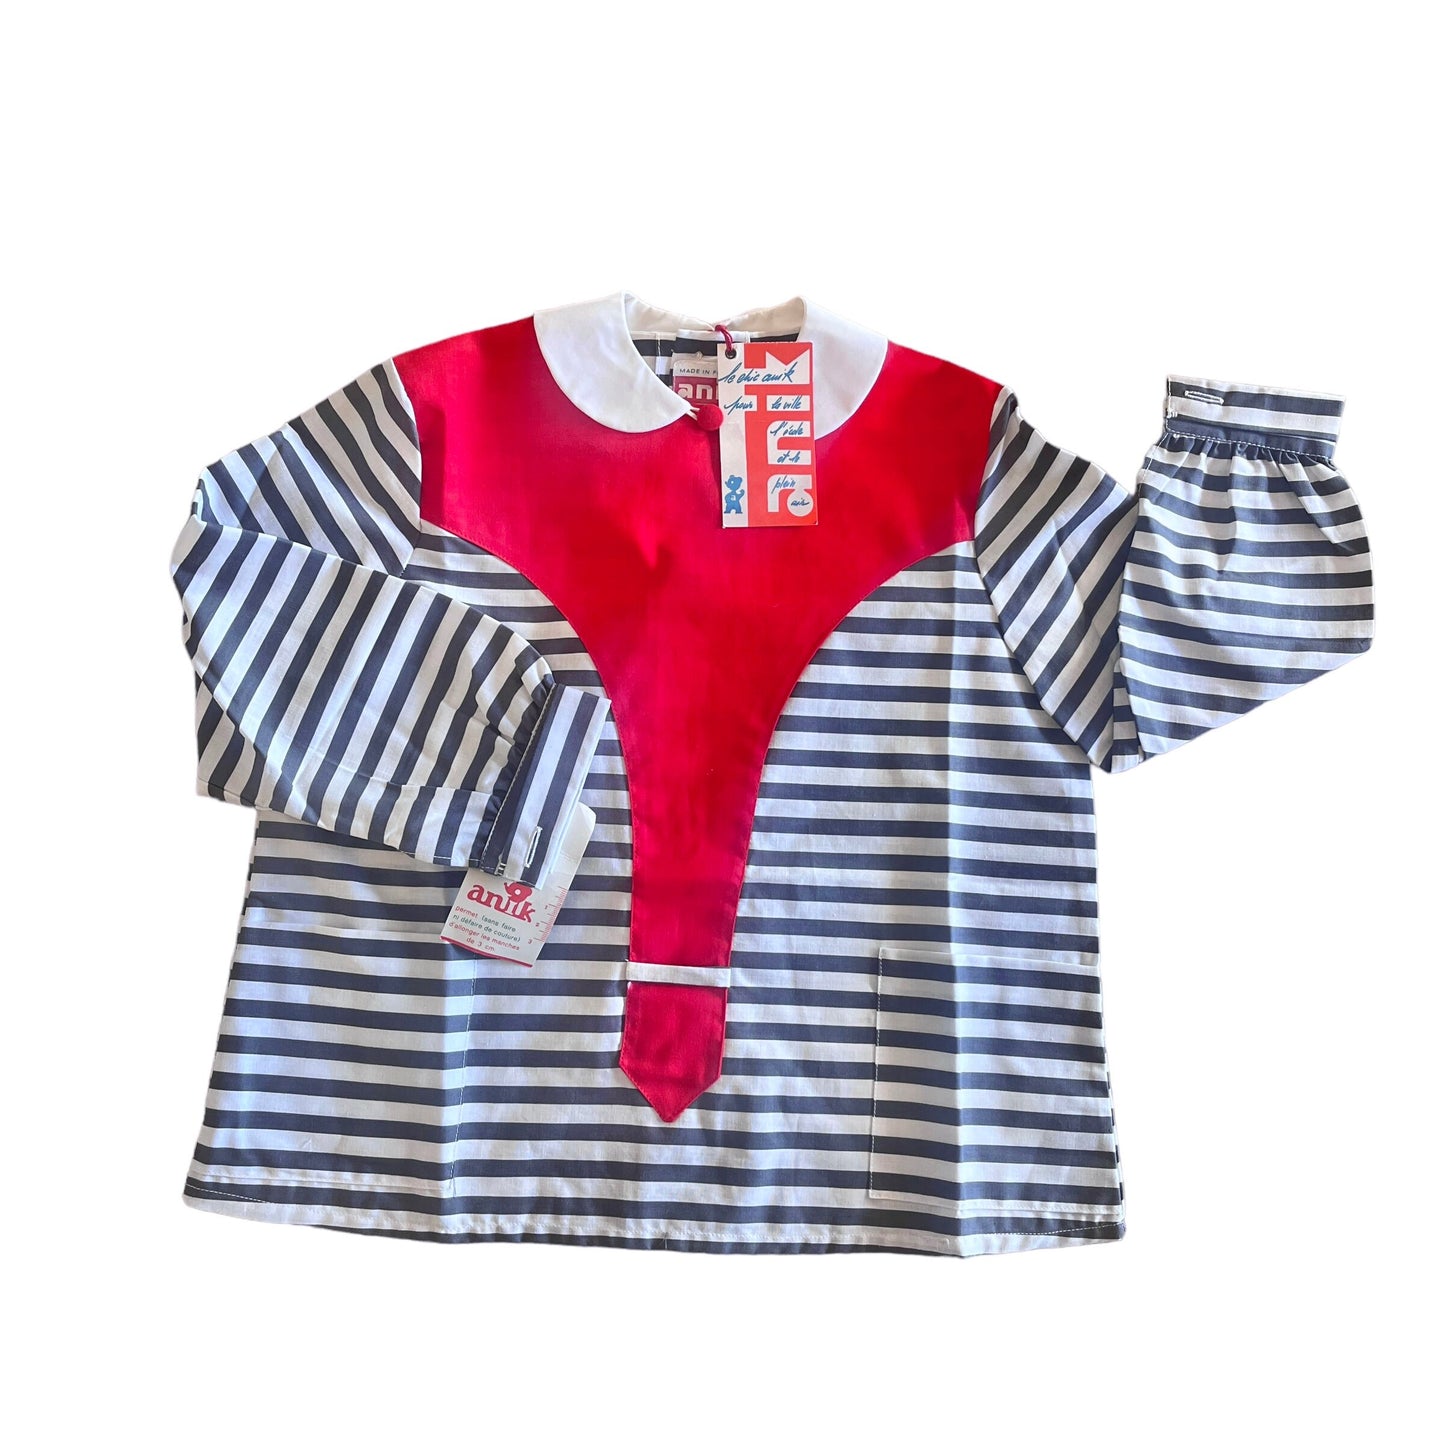 1970's Striped Shirt/Blouse / 5-6 Years